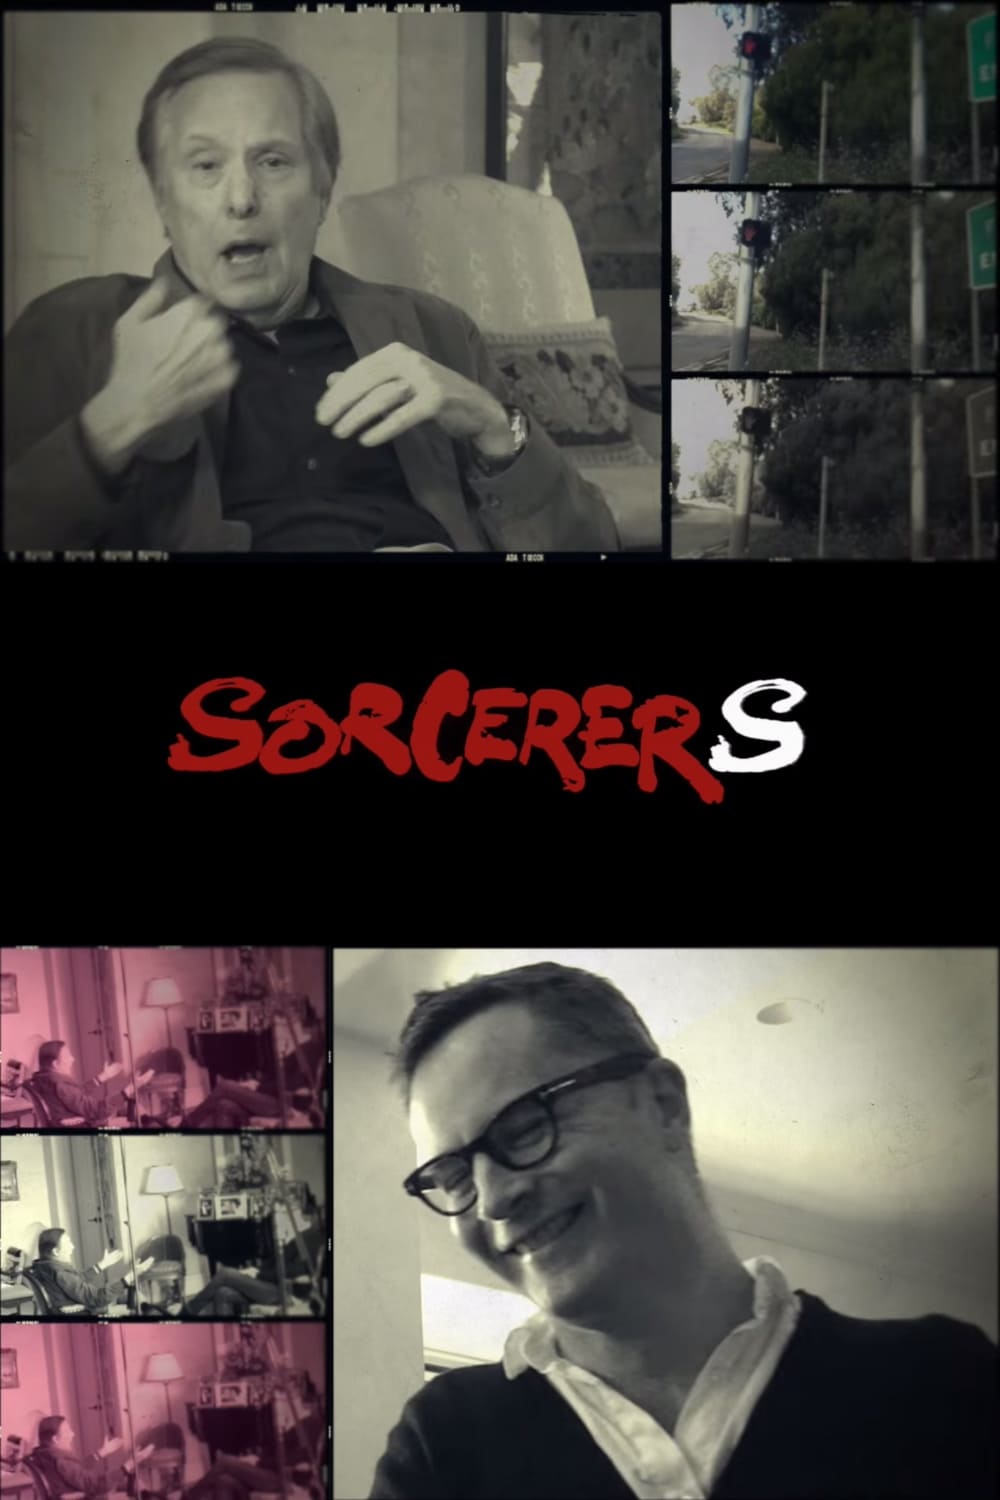 Sorcerers: A Conversation with William Friedkin and Nicolas Winding Refn